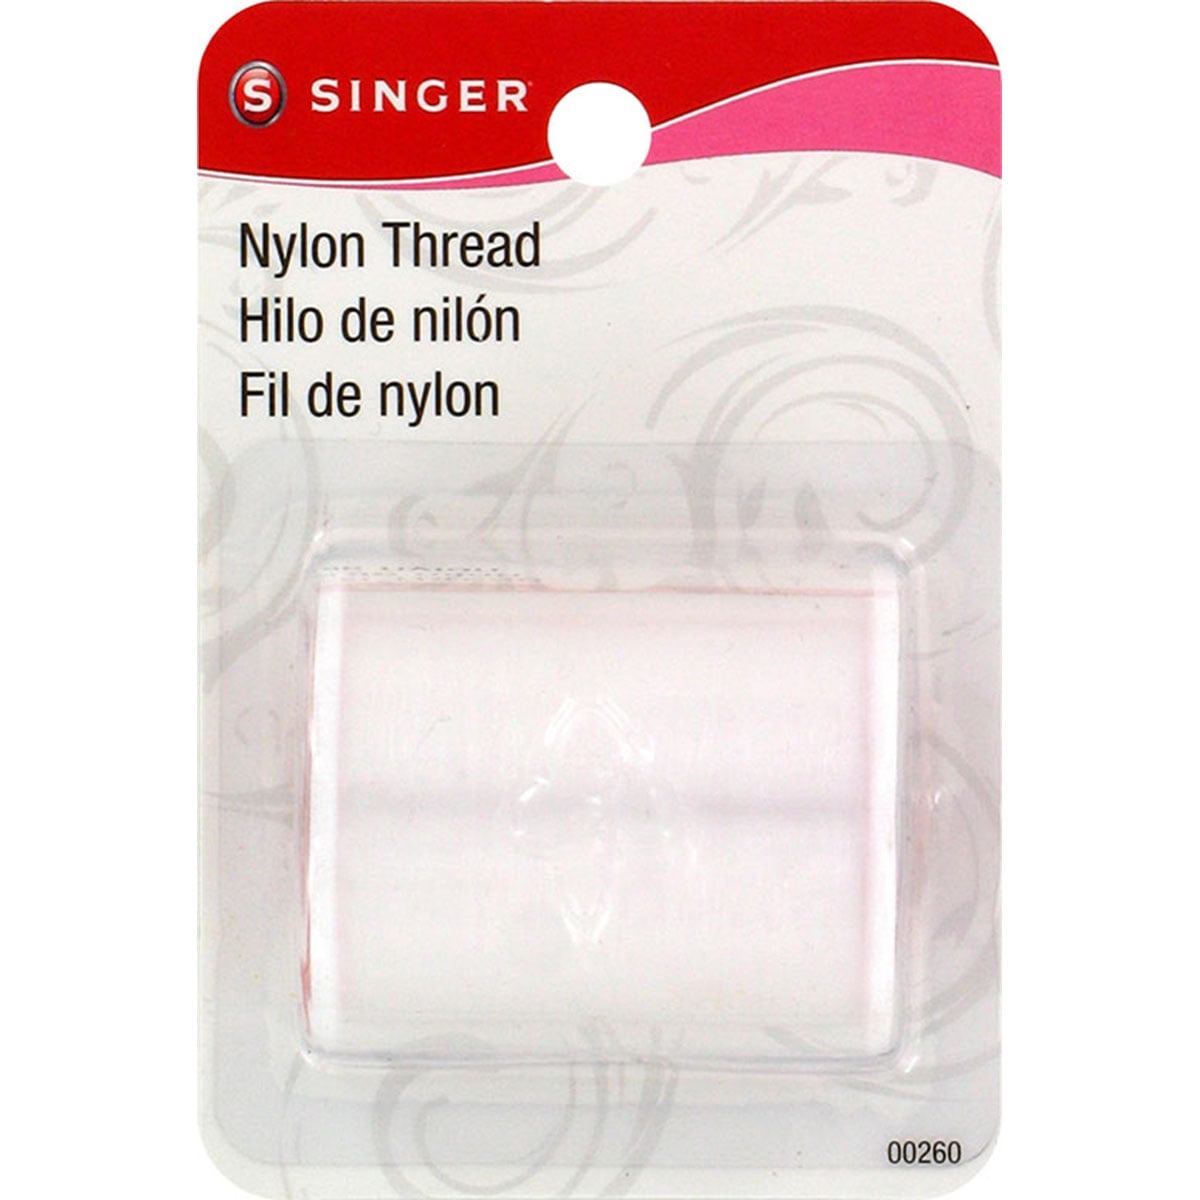 2 pack 135-Yard SINGER Clear Invisible Nylon Thread 